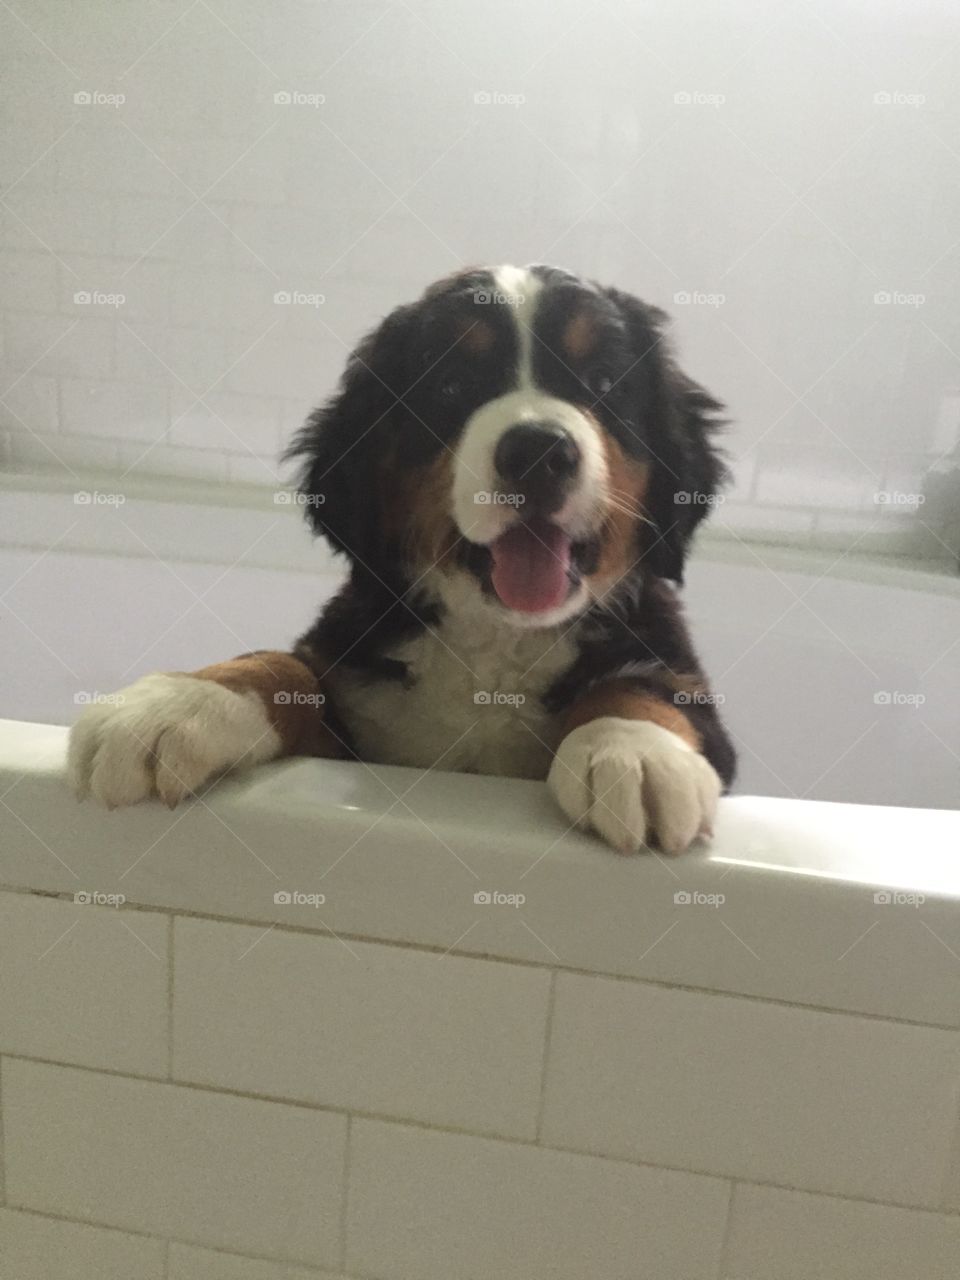 Hutch, excited for a bath